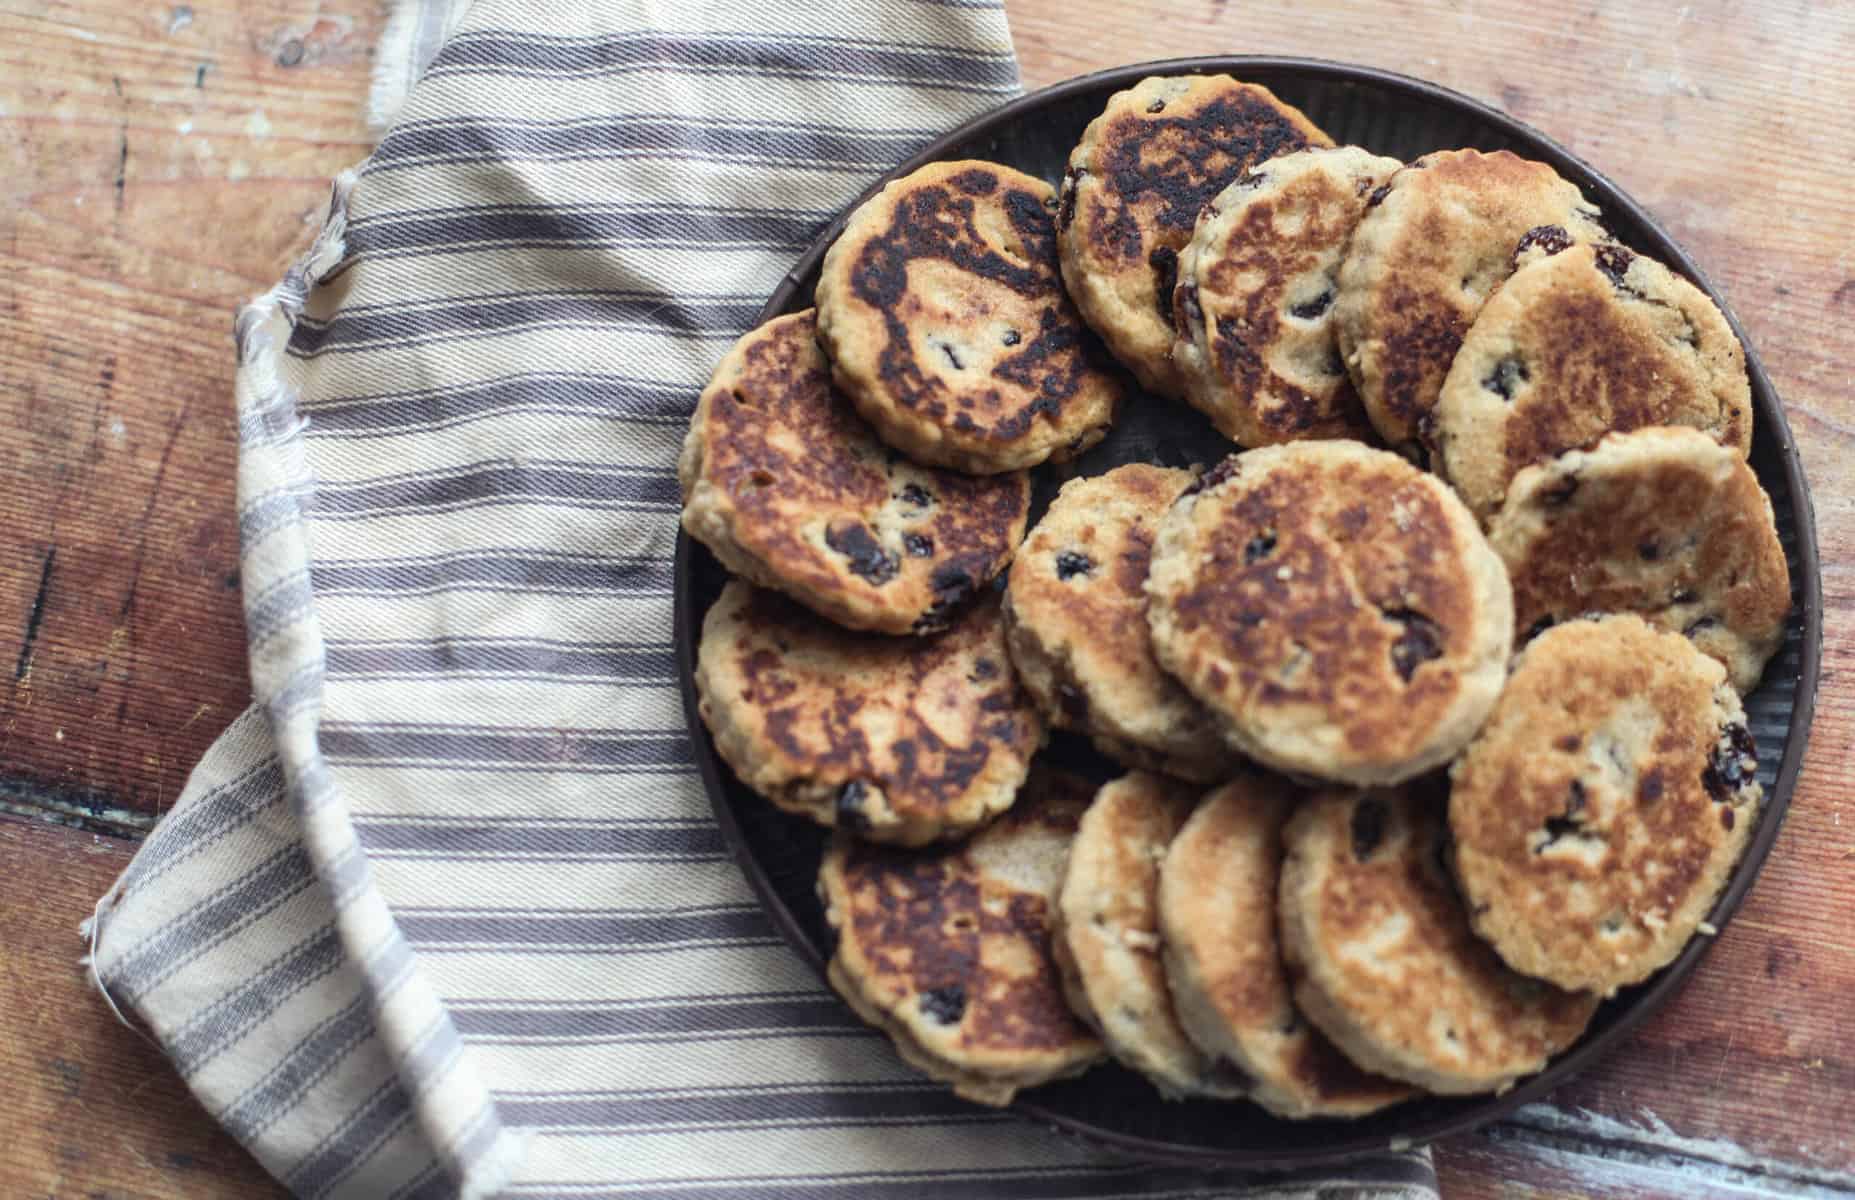 A plate full of Welsh Cakes.